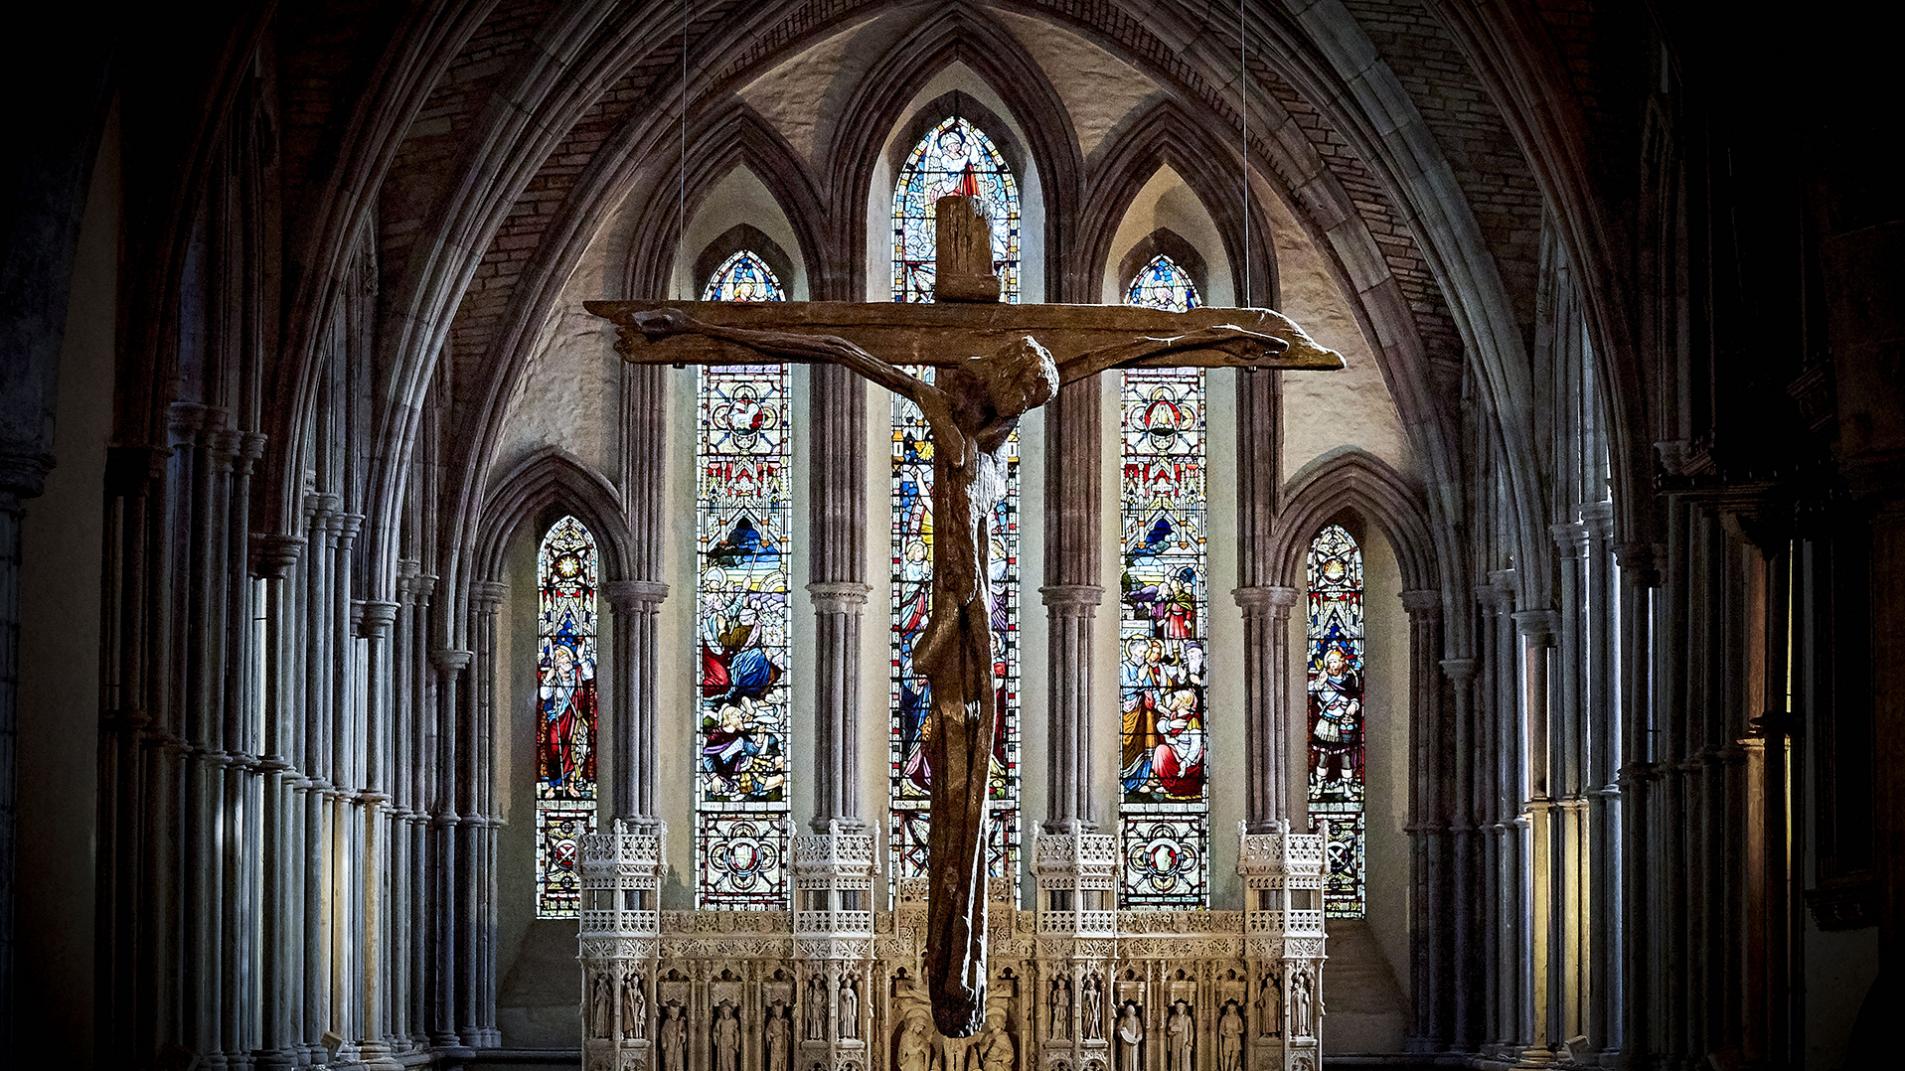 Image of interior of Brecon Cathedral, stain glass window in background with wooden cross in foreground